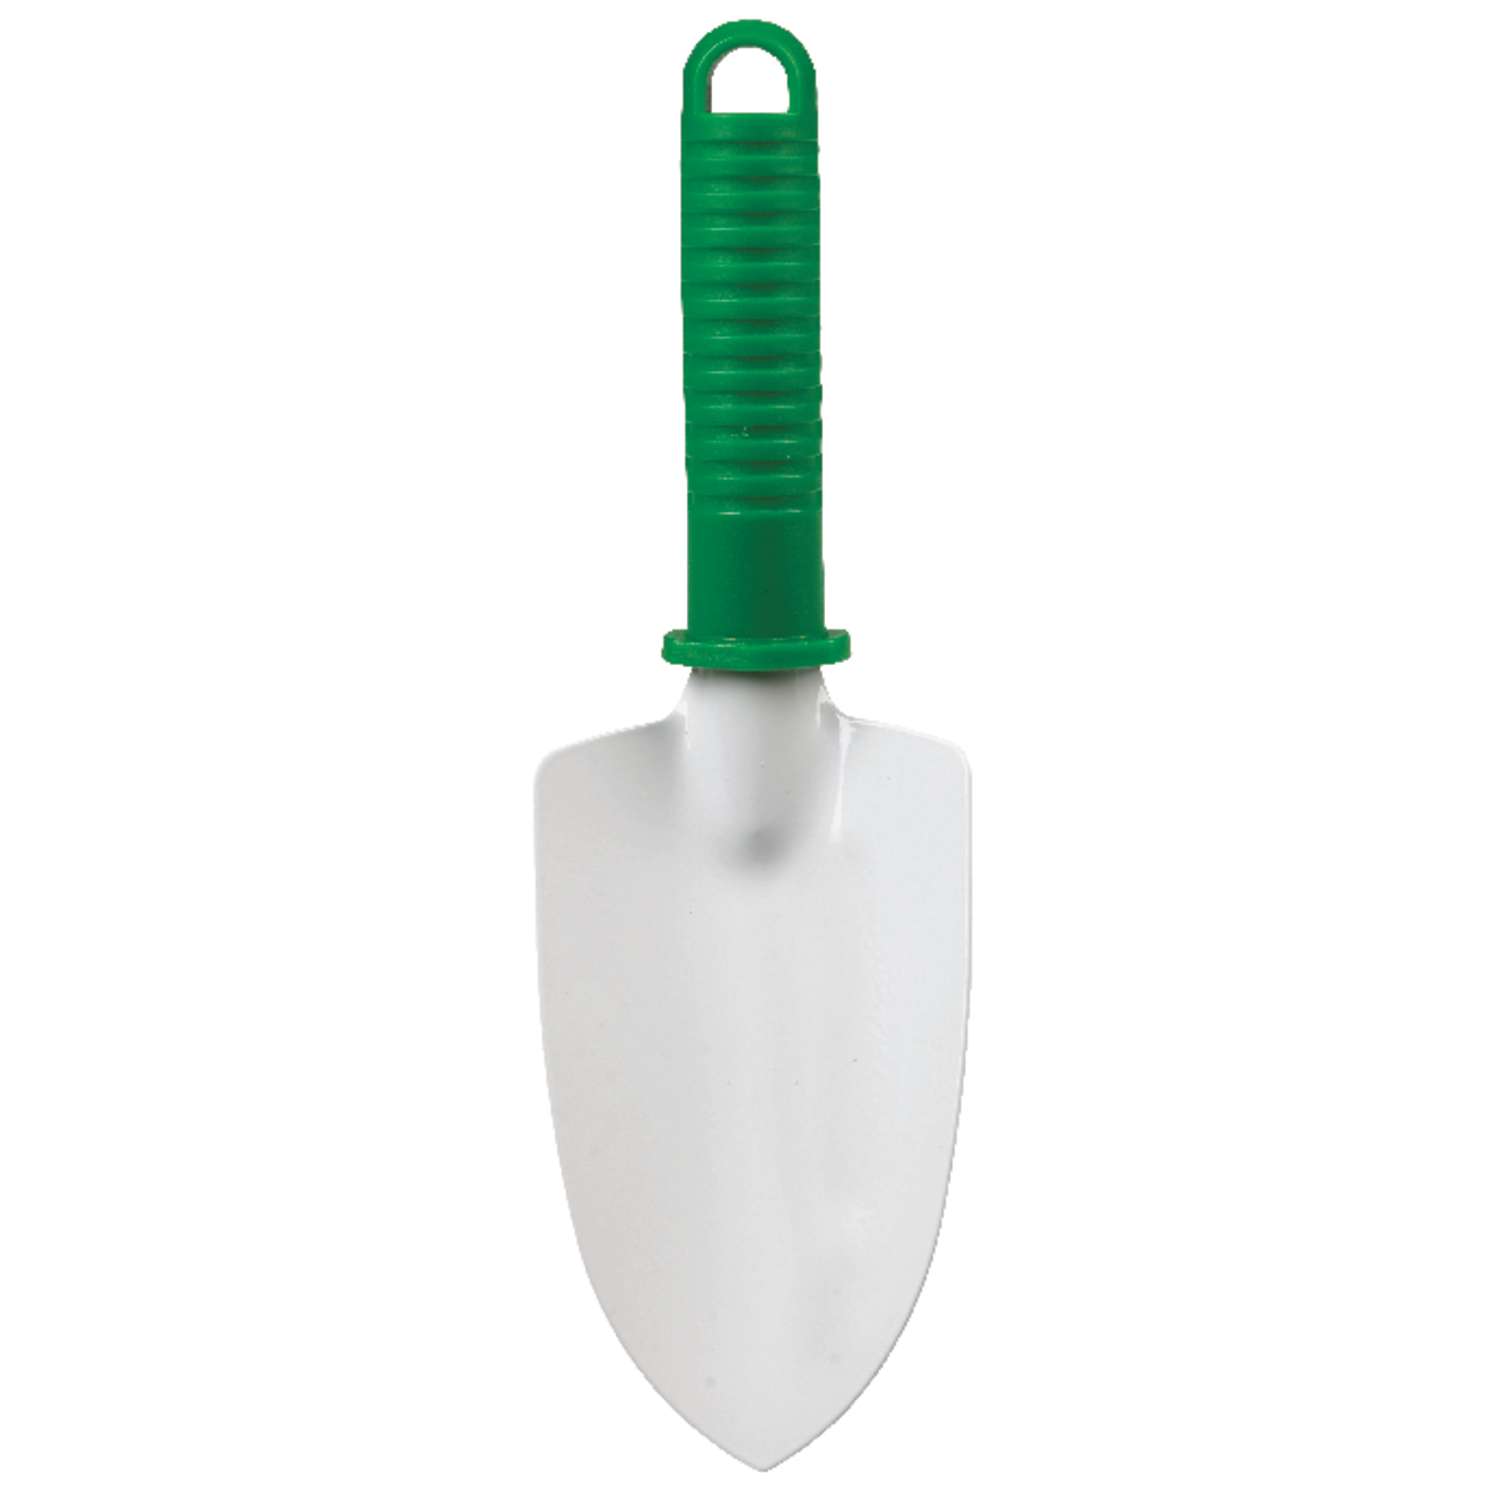 Hand Gardening Trowel Tough & Extremely Durable ABS Plastic 11" WHOLESALE PRICES 